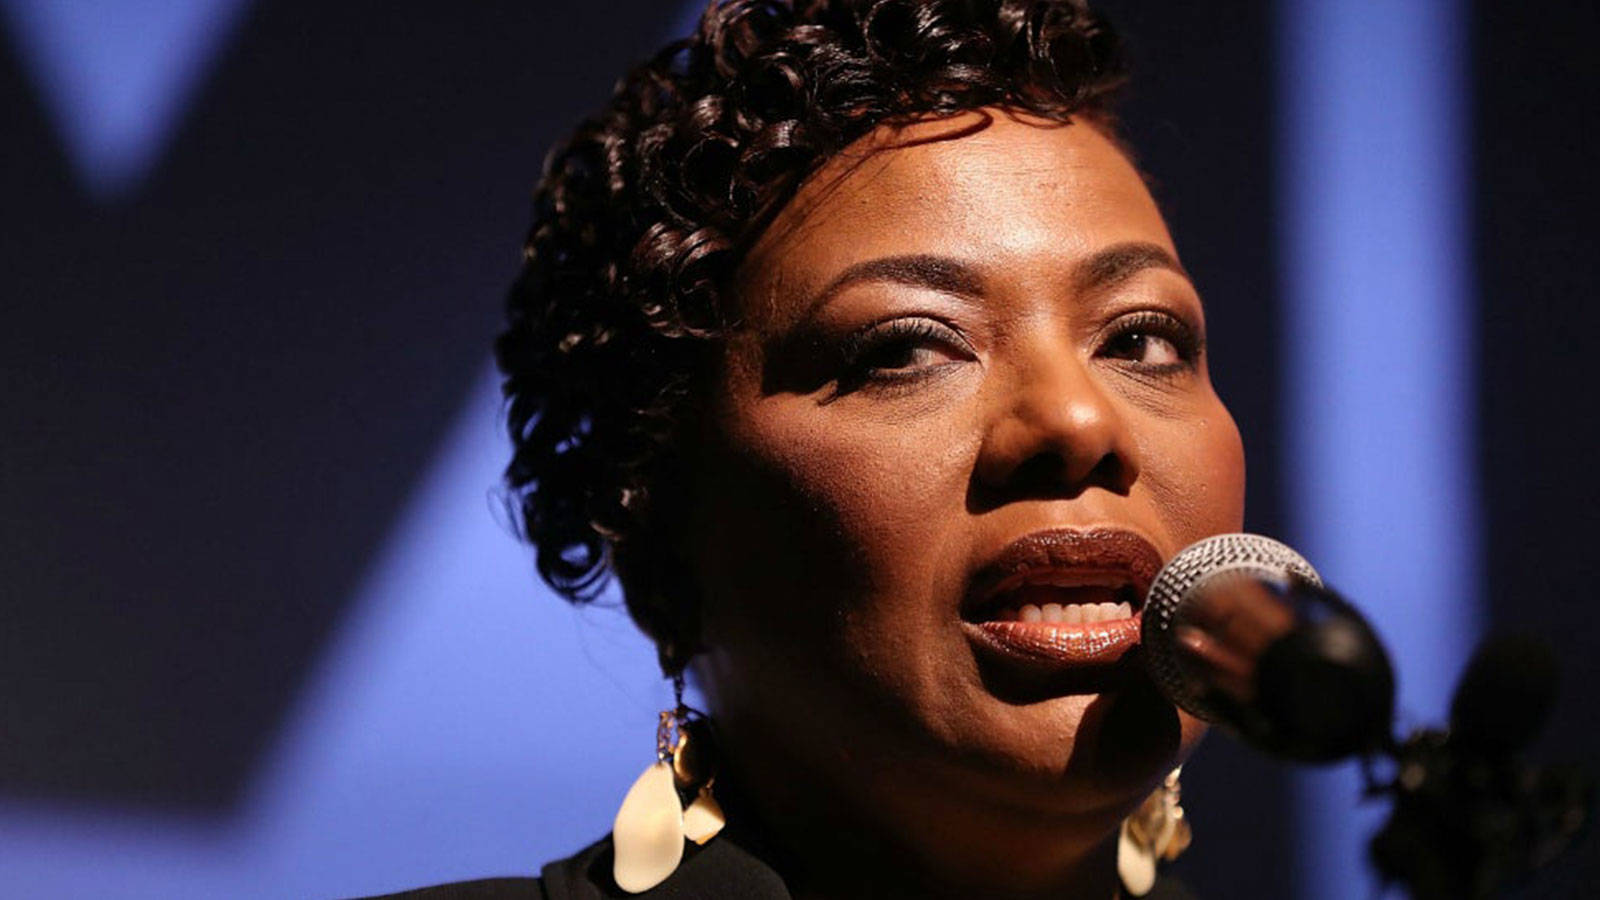 Bernice King hits GOP: ‘Beyond insulting’ to misuse MLK’s teachings to oppose critical race theory